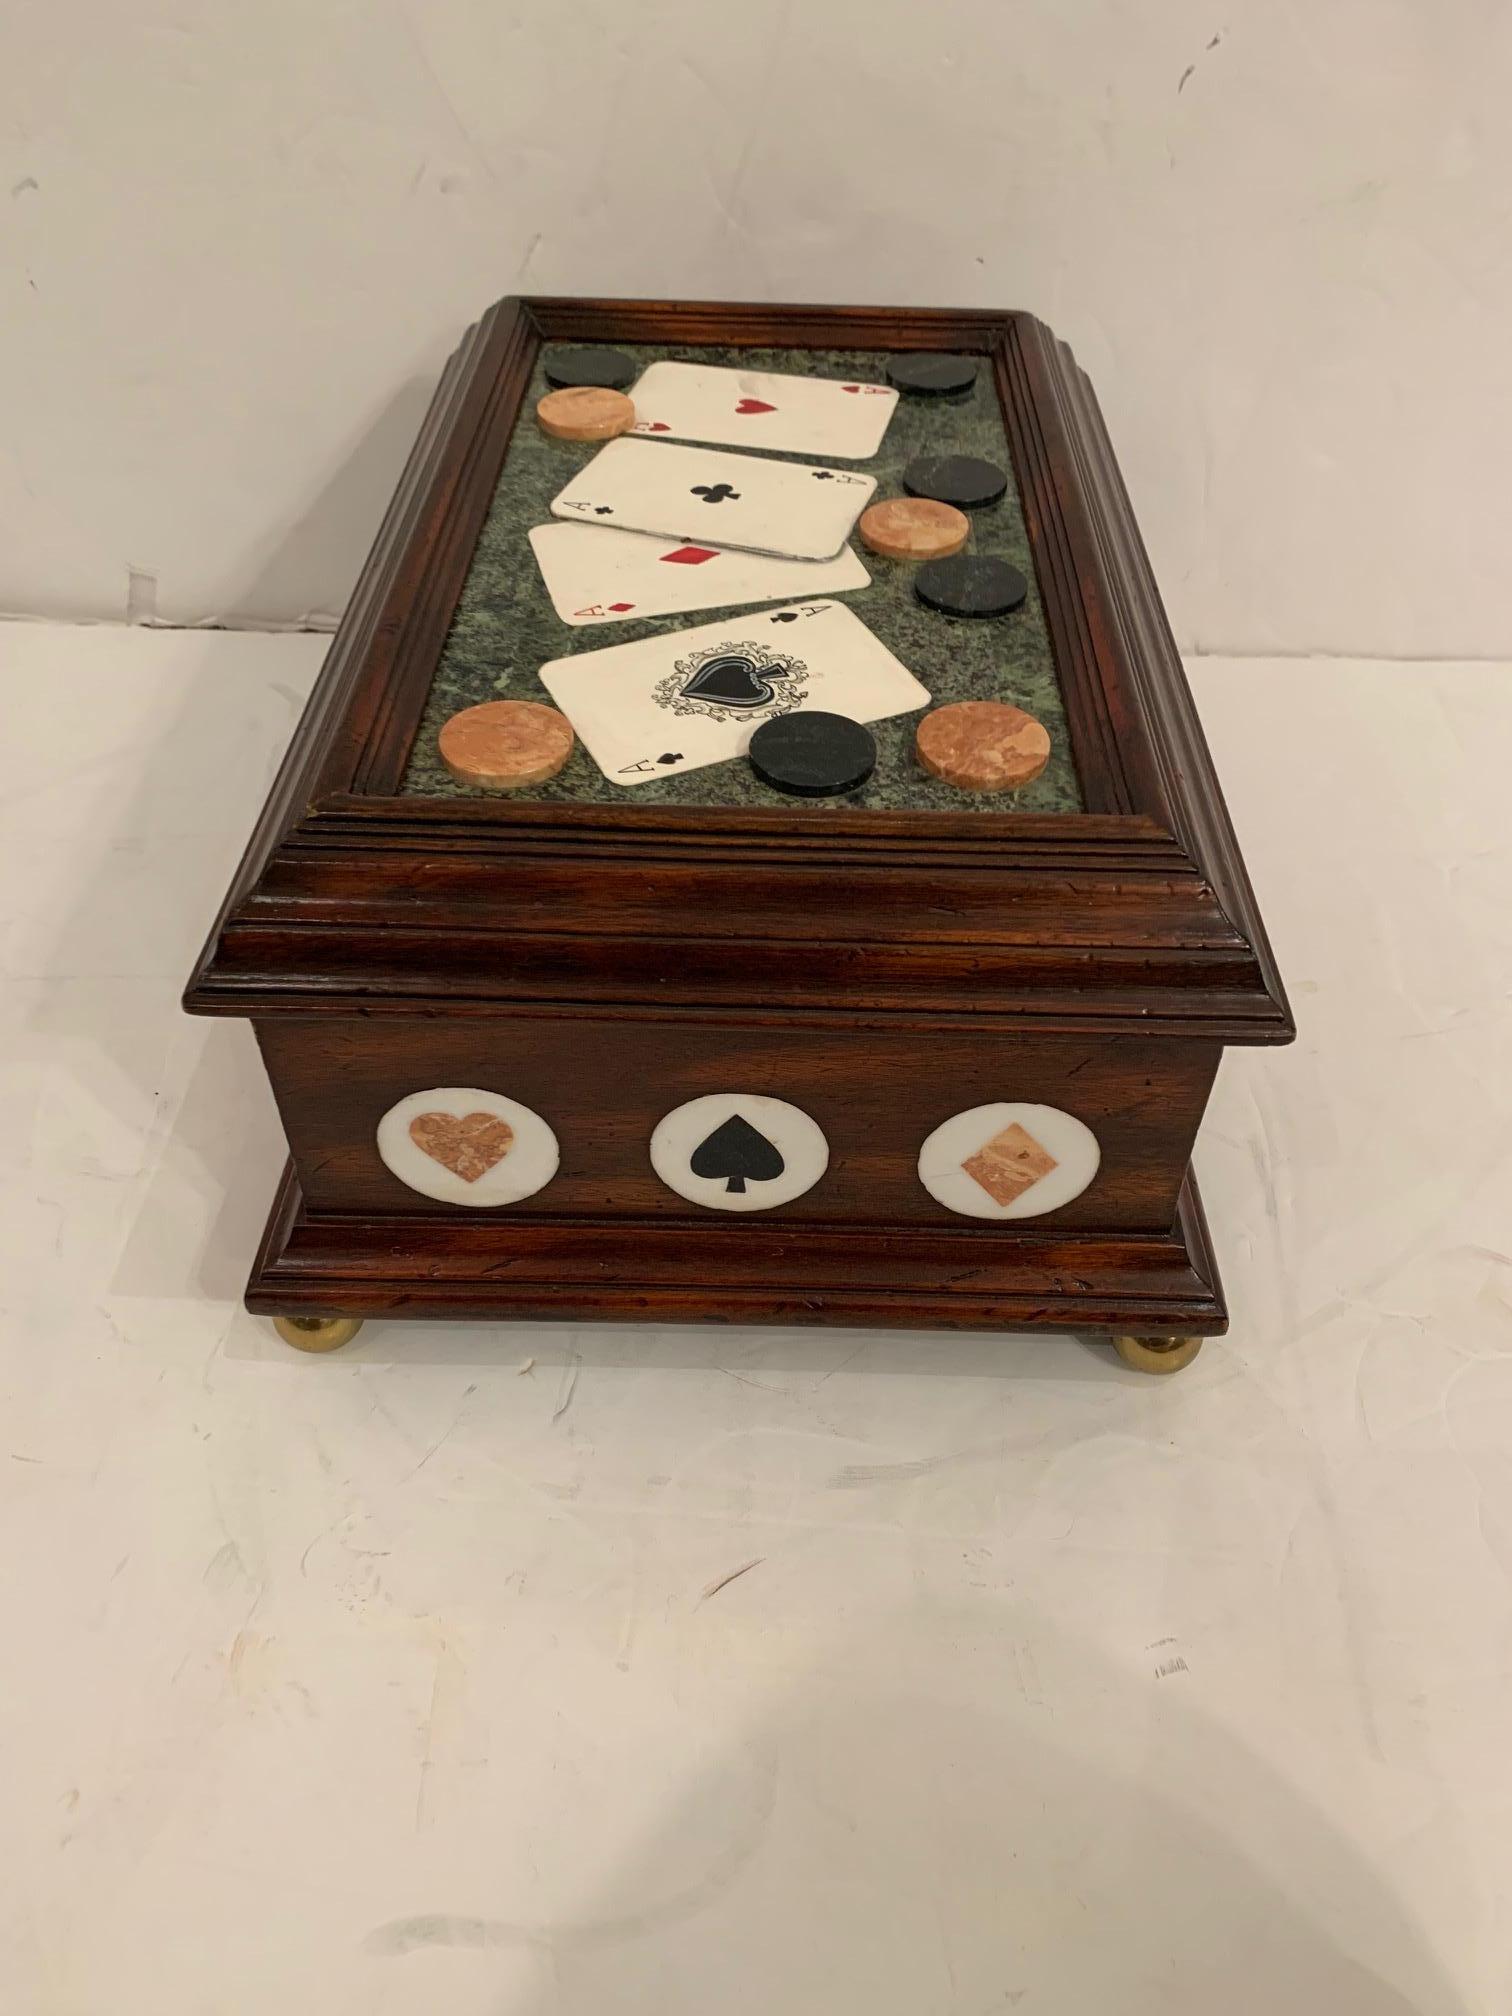 Sensational rare and unusual poker game box by Maitland Smith, beautifully made sitting on 4 brass feet having interior mirror inside. Outside has hand painted cards, marble poker chips and inset marble playing card suits.